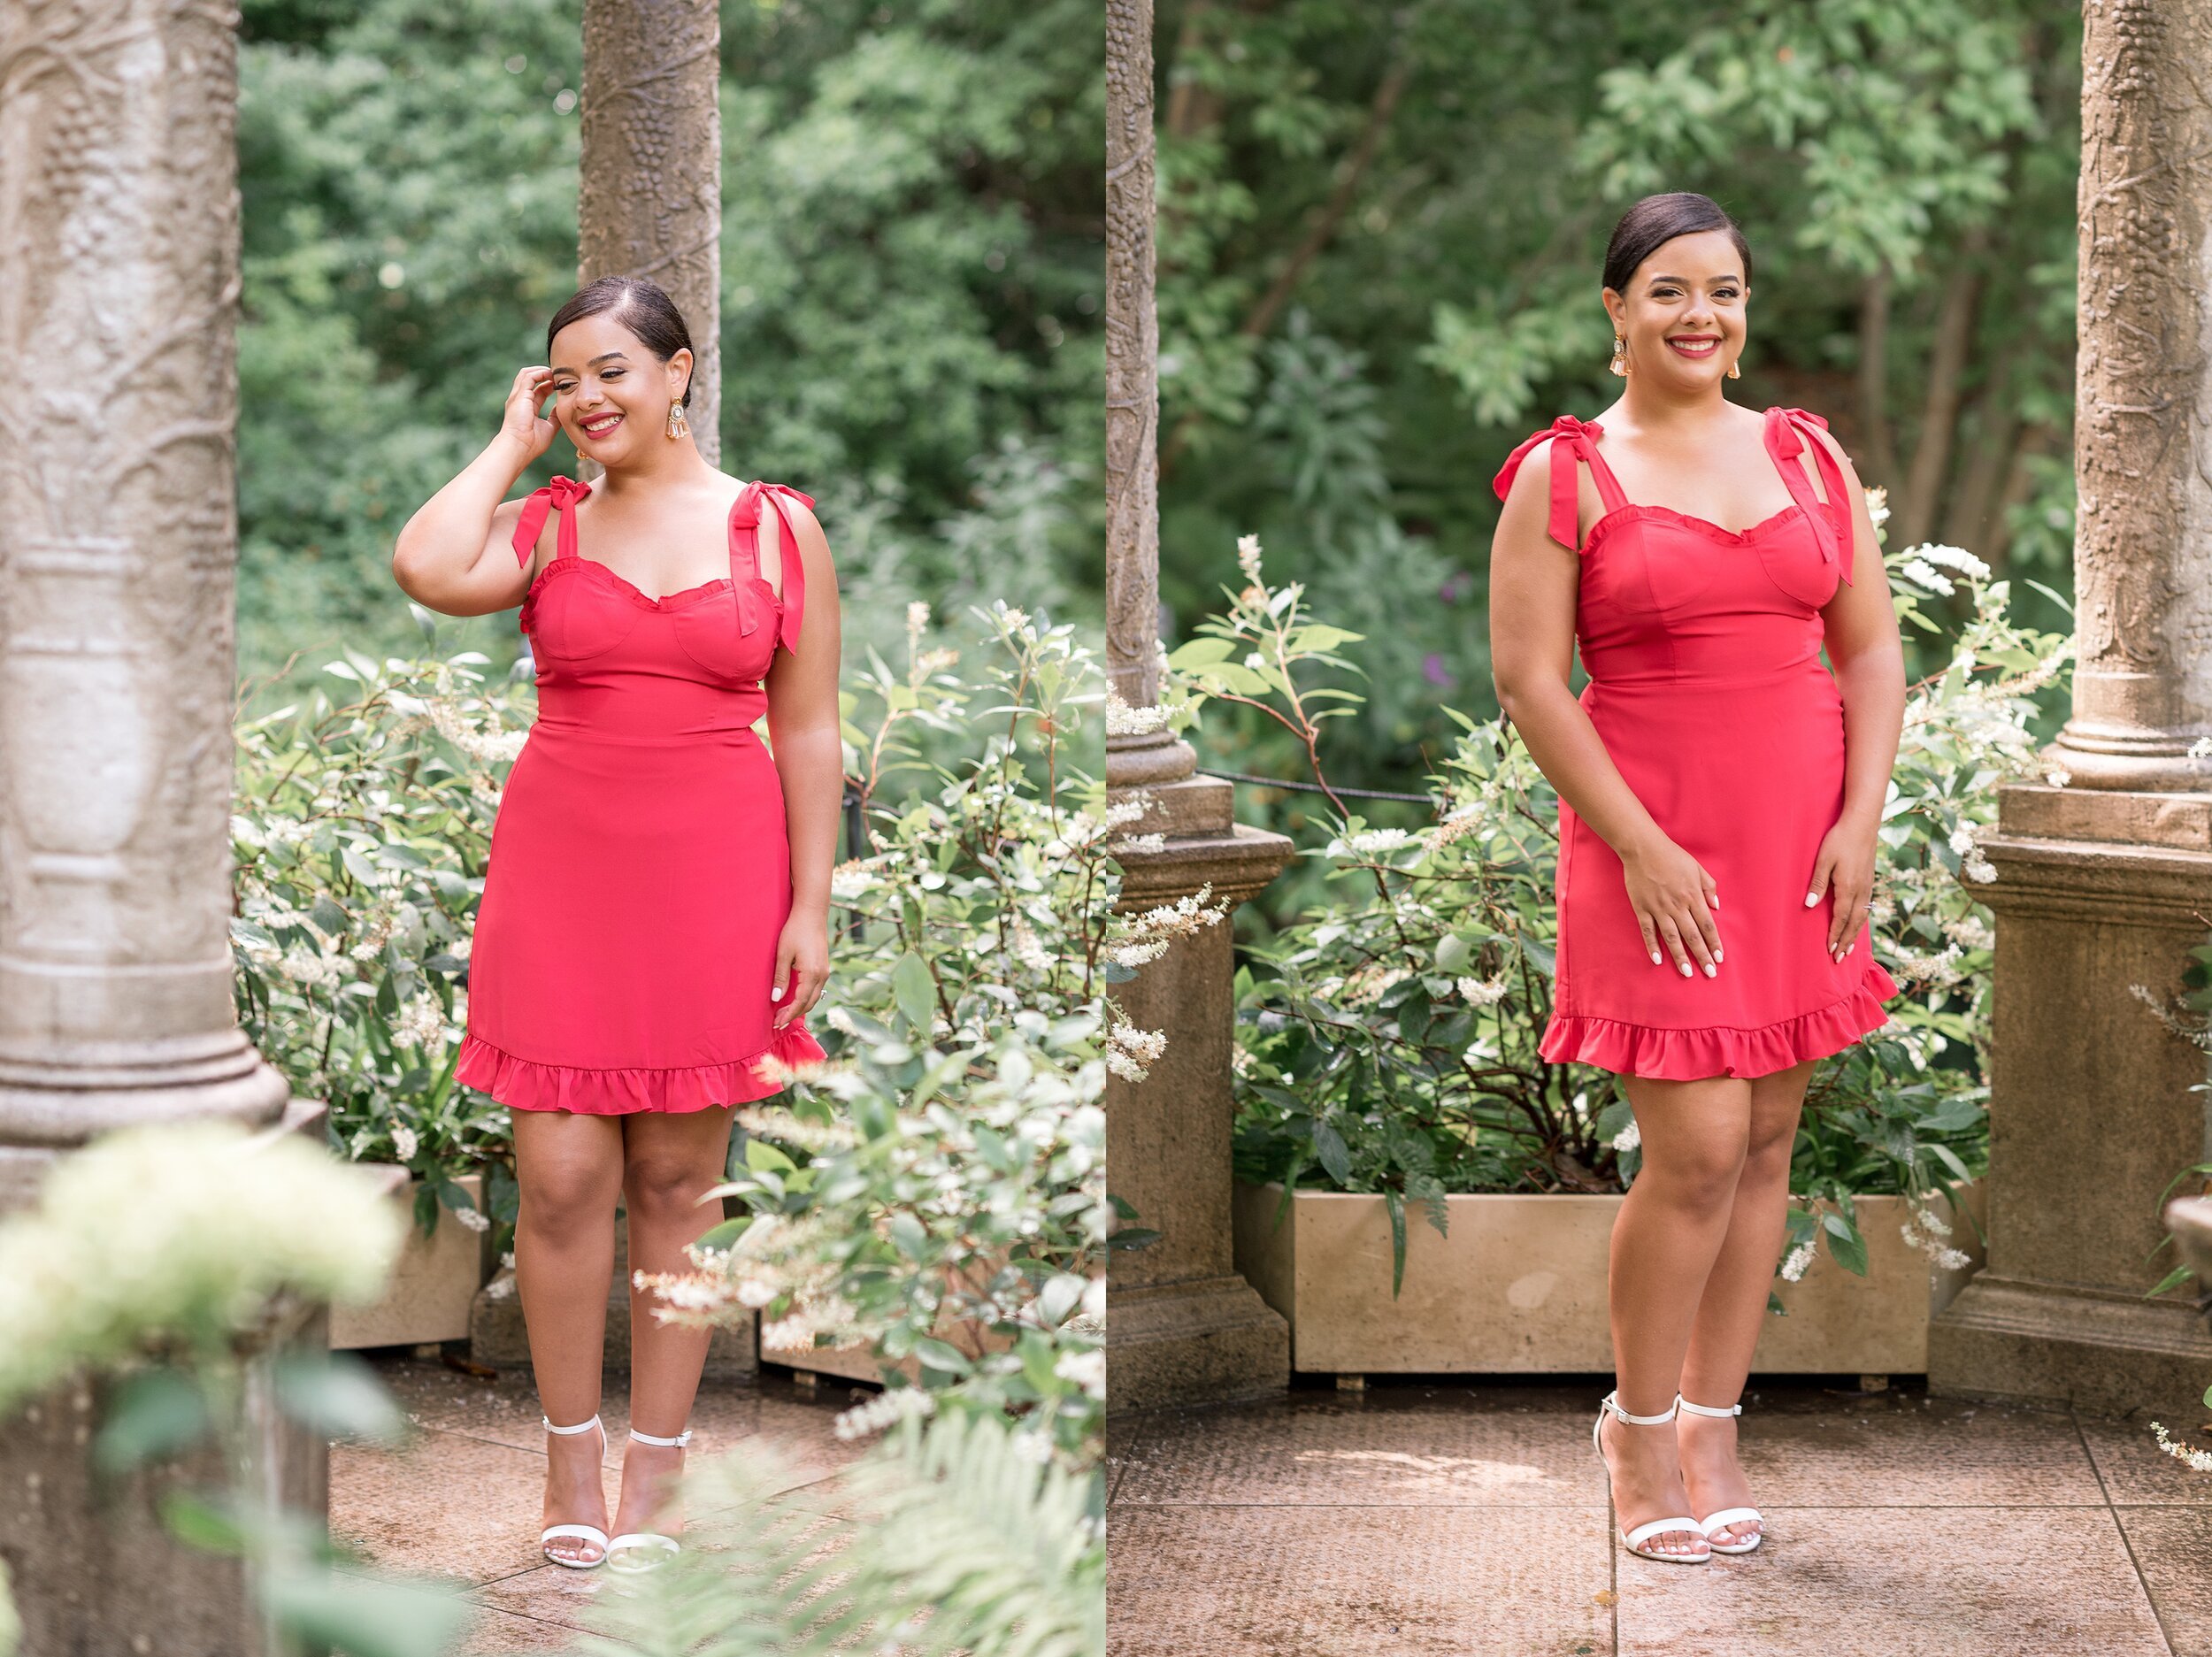 Longwood Gardens Kennet Square Pa Summer Engagement Session Photography_7683.jpg